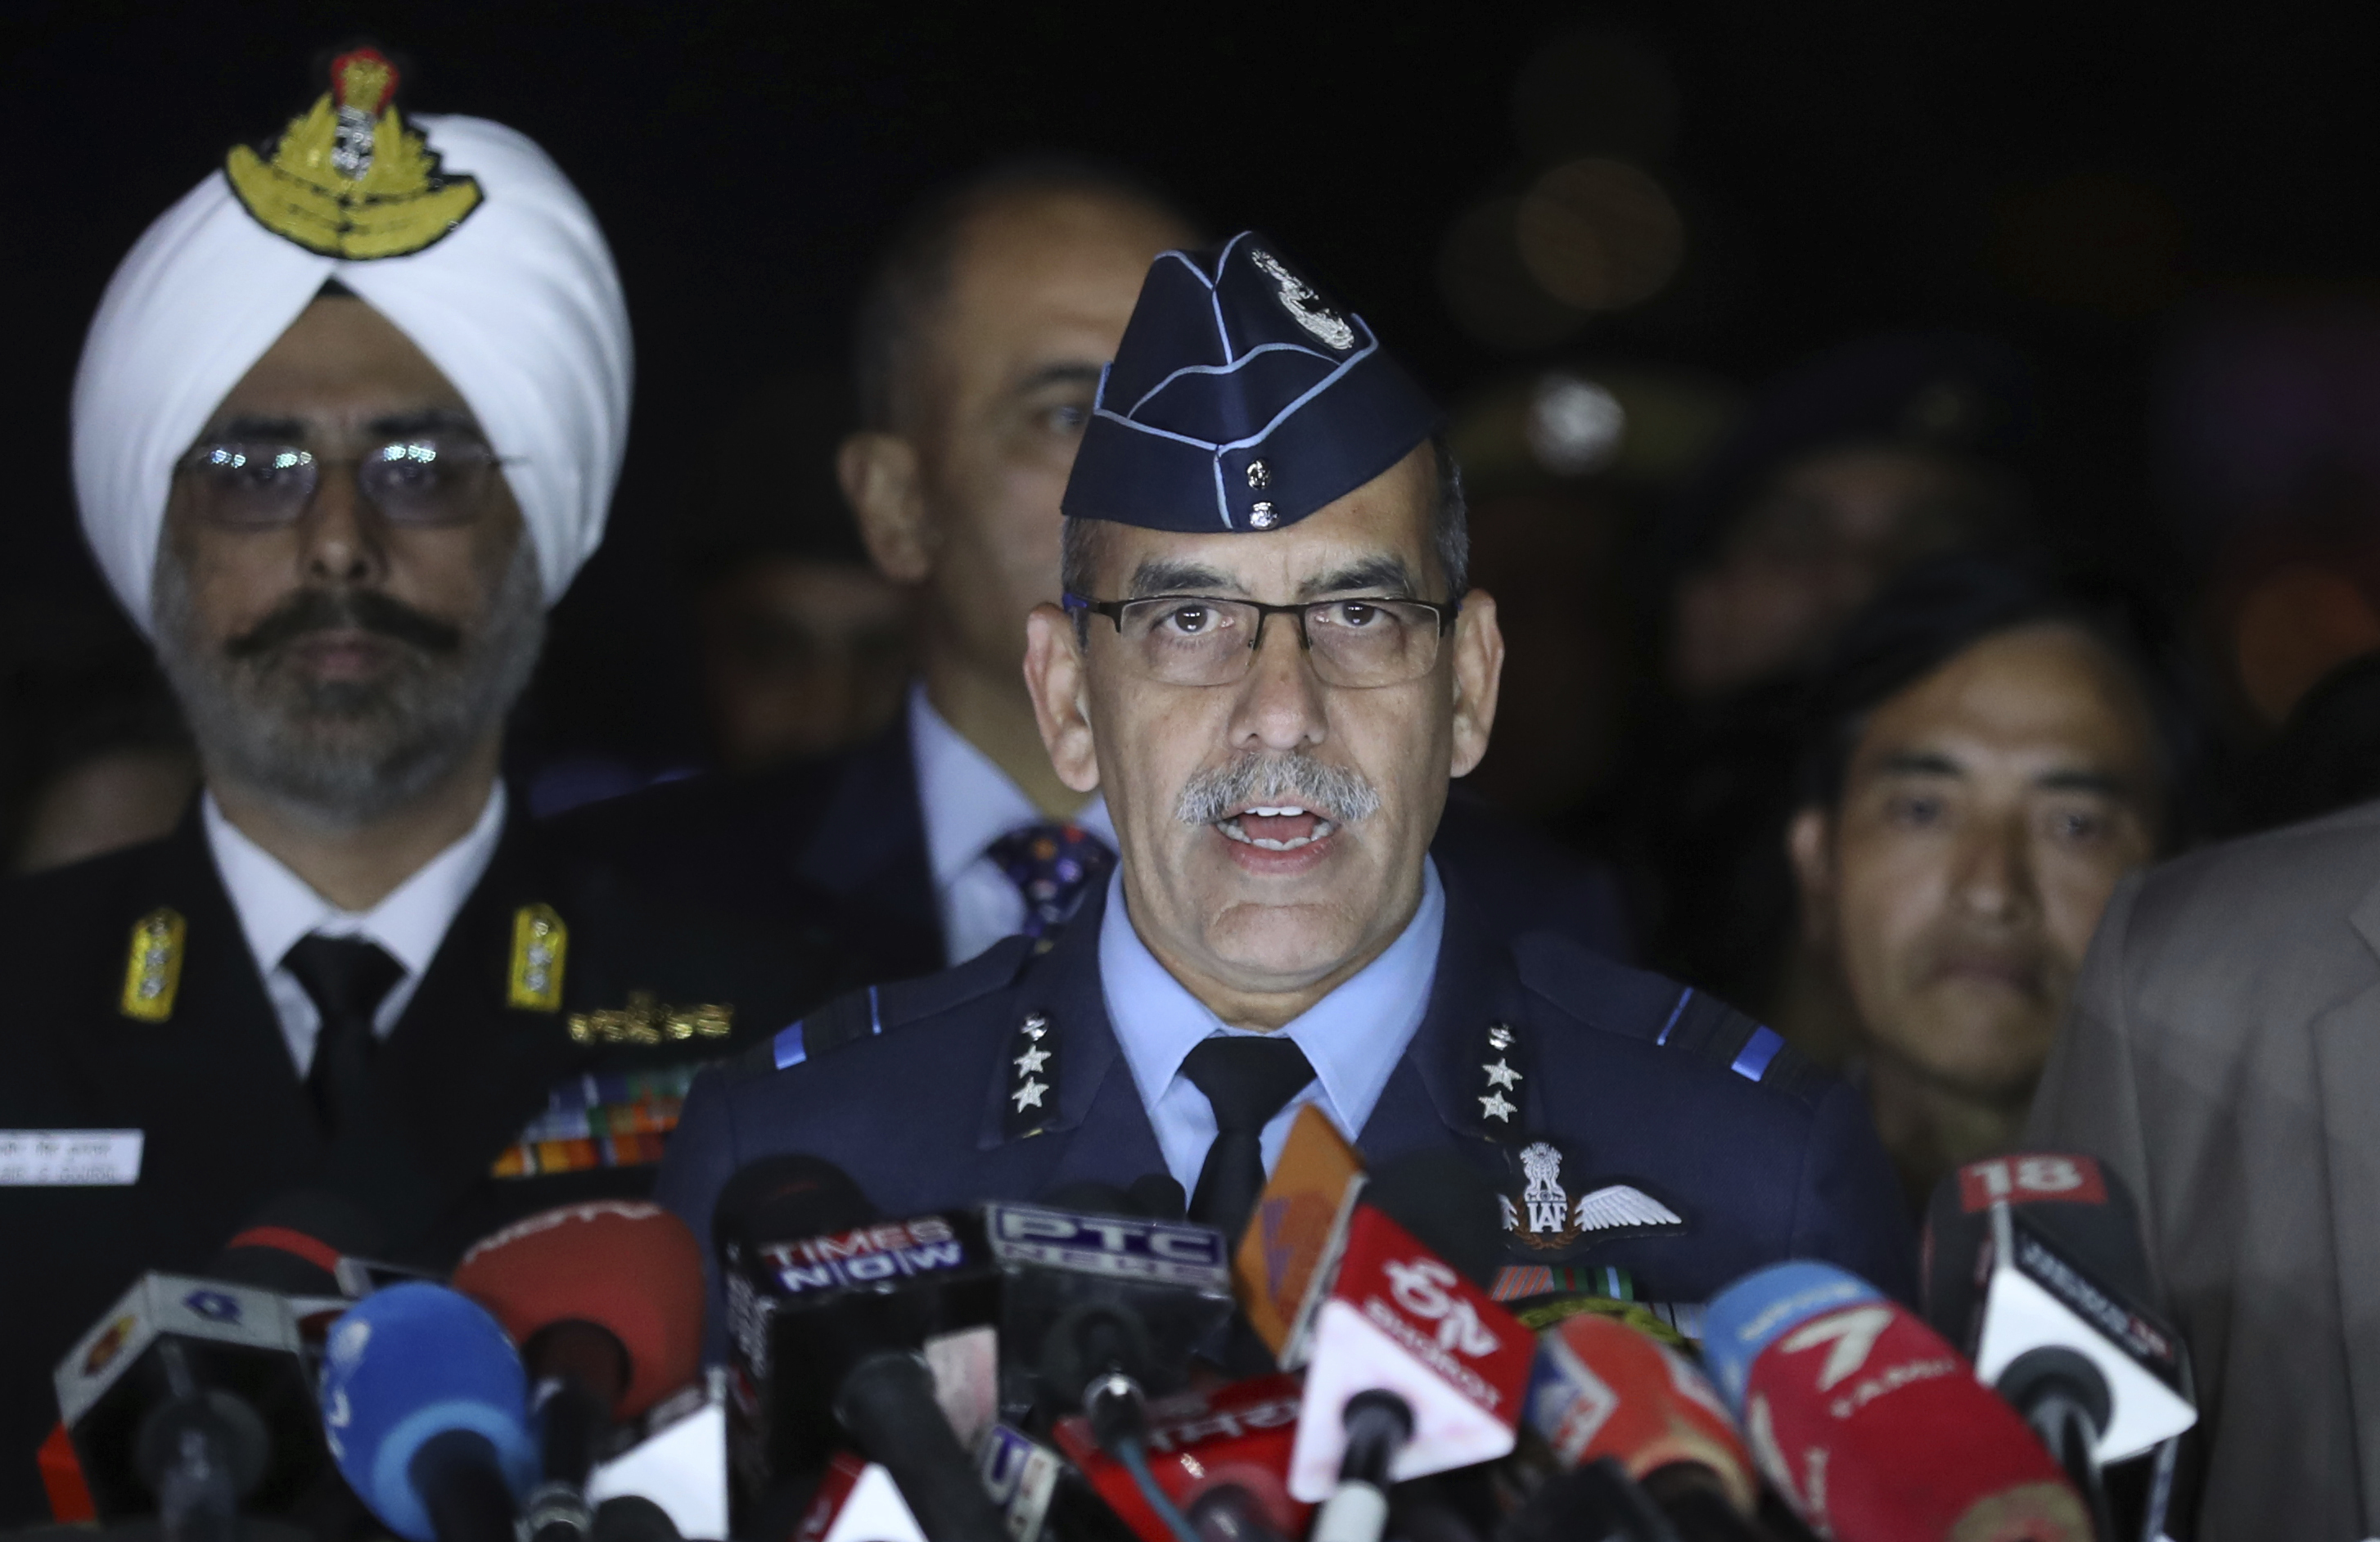 Indian Air Force Air Vice Marshal R.G.K. Kapoor addresses the media in New Delhi, India, on Thursday, February 28.